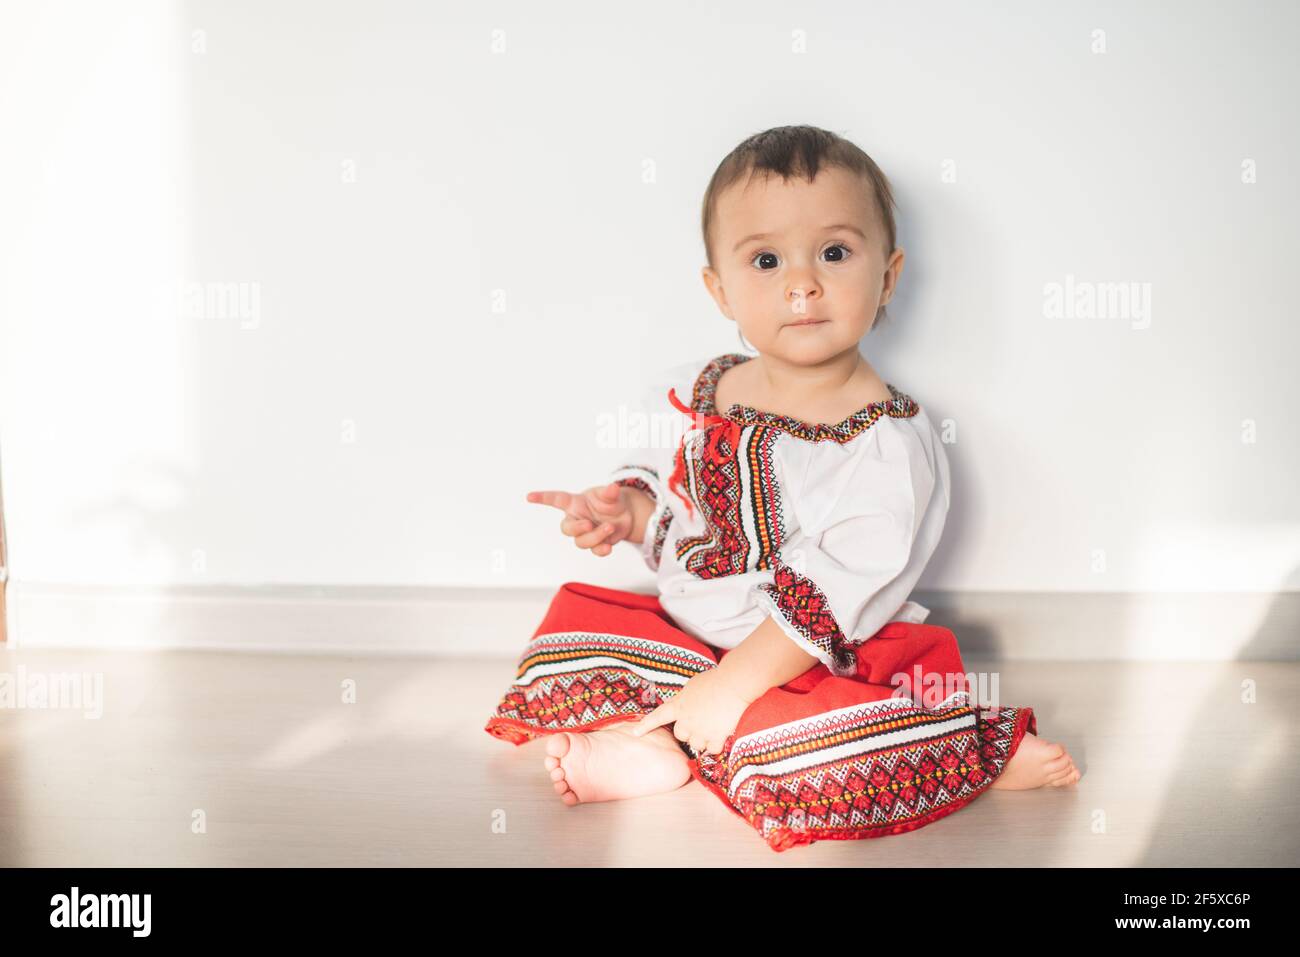 Portrait of cute infant baby girl wearing a traditional Romanian costume Stock Photo